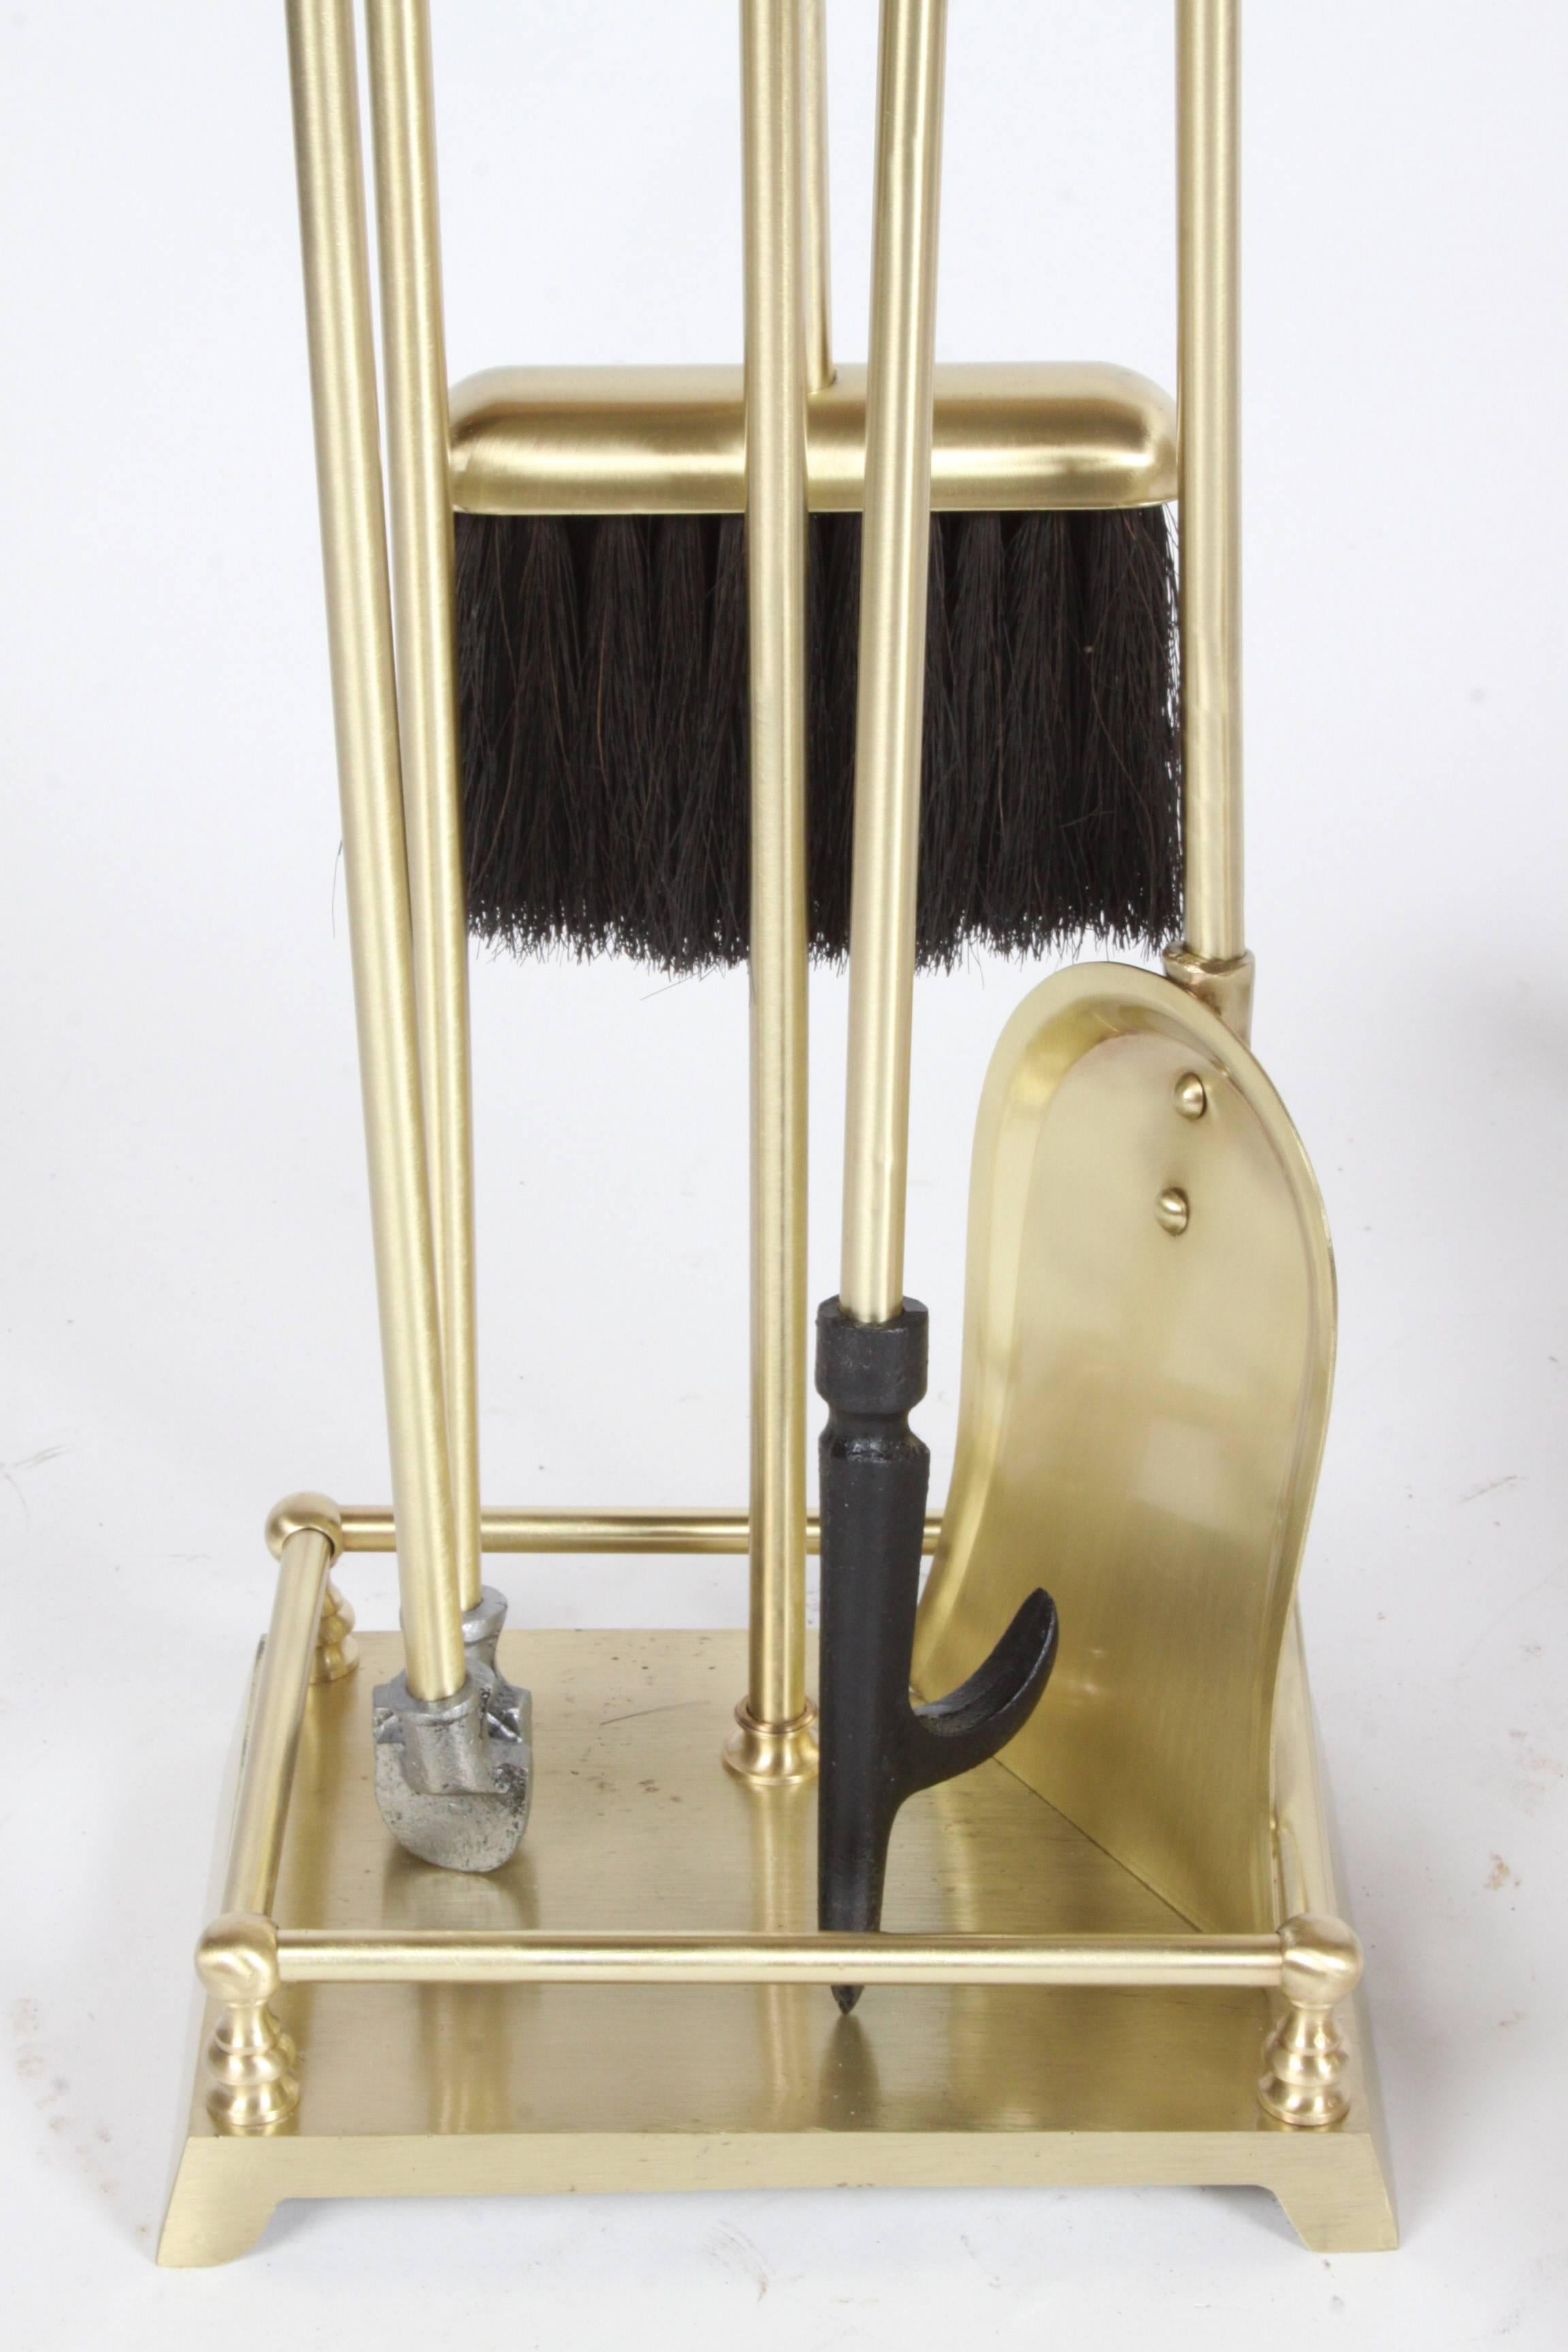 Brass Art Deco Modern torqued Andirons and Fire Tools Set, Deskey Style In Excellent Condition For Sale In St. Louis, MO